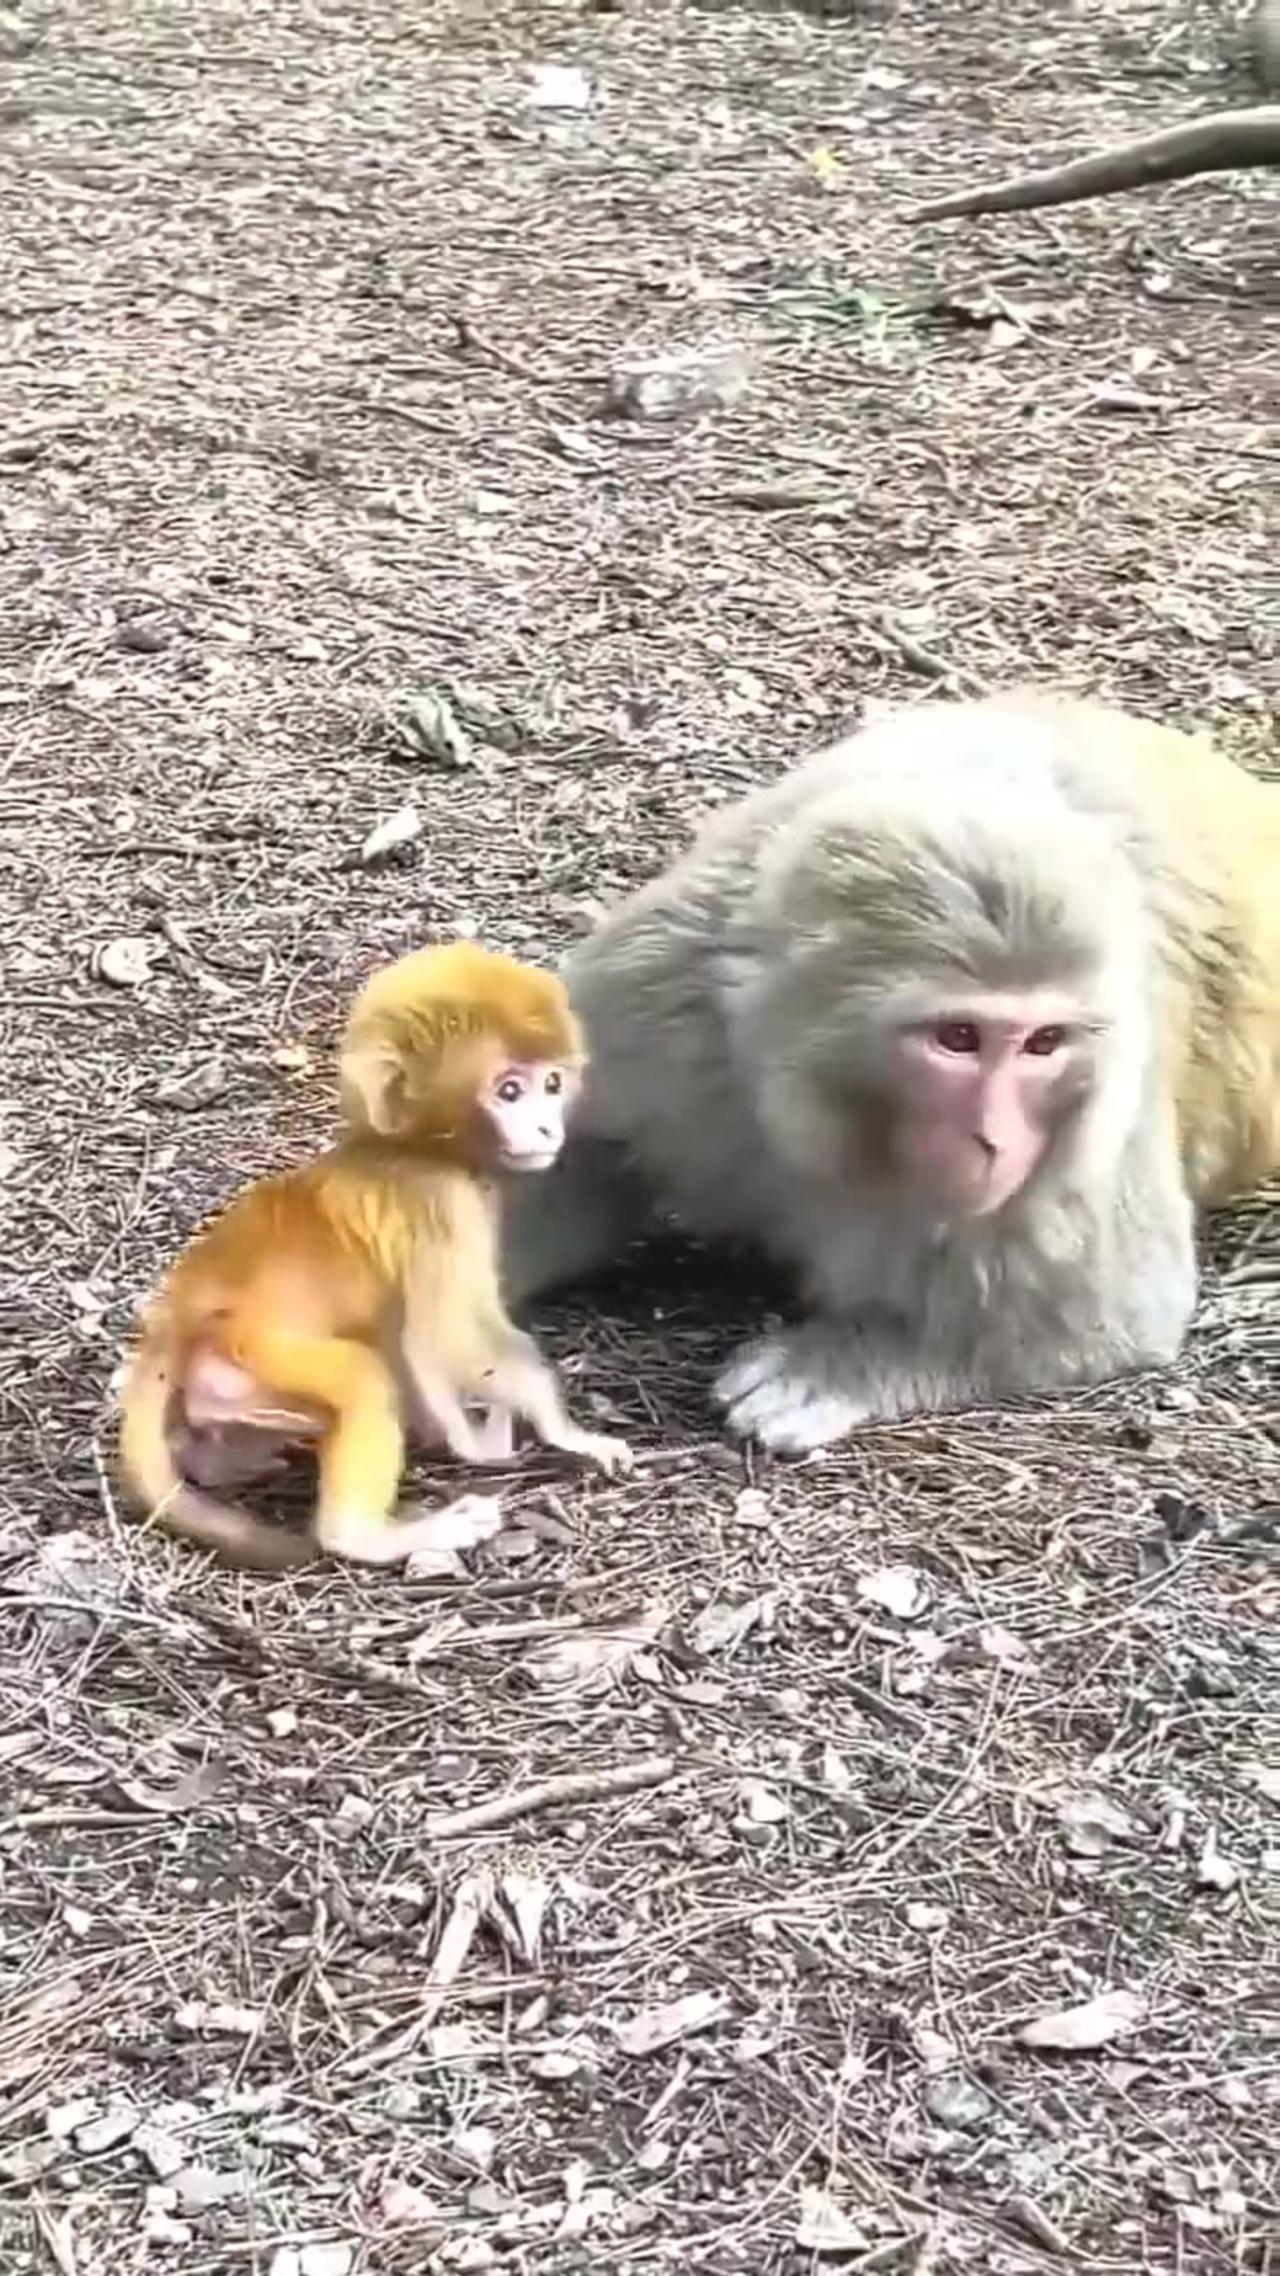 Watch how this mama monkey teaches her baby to walk with love